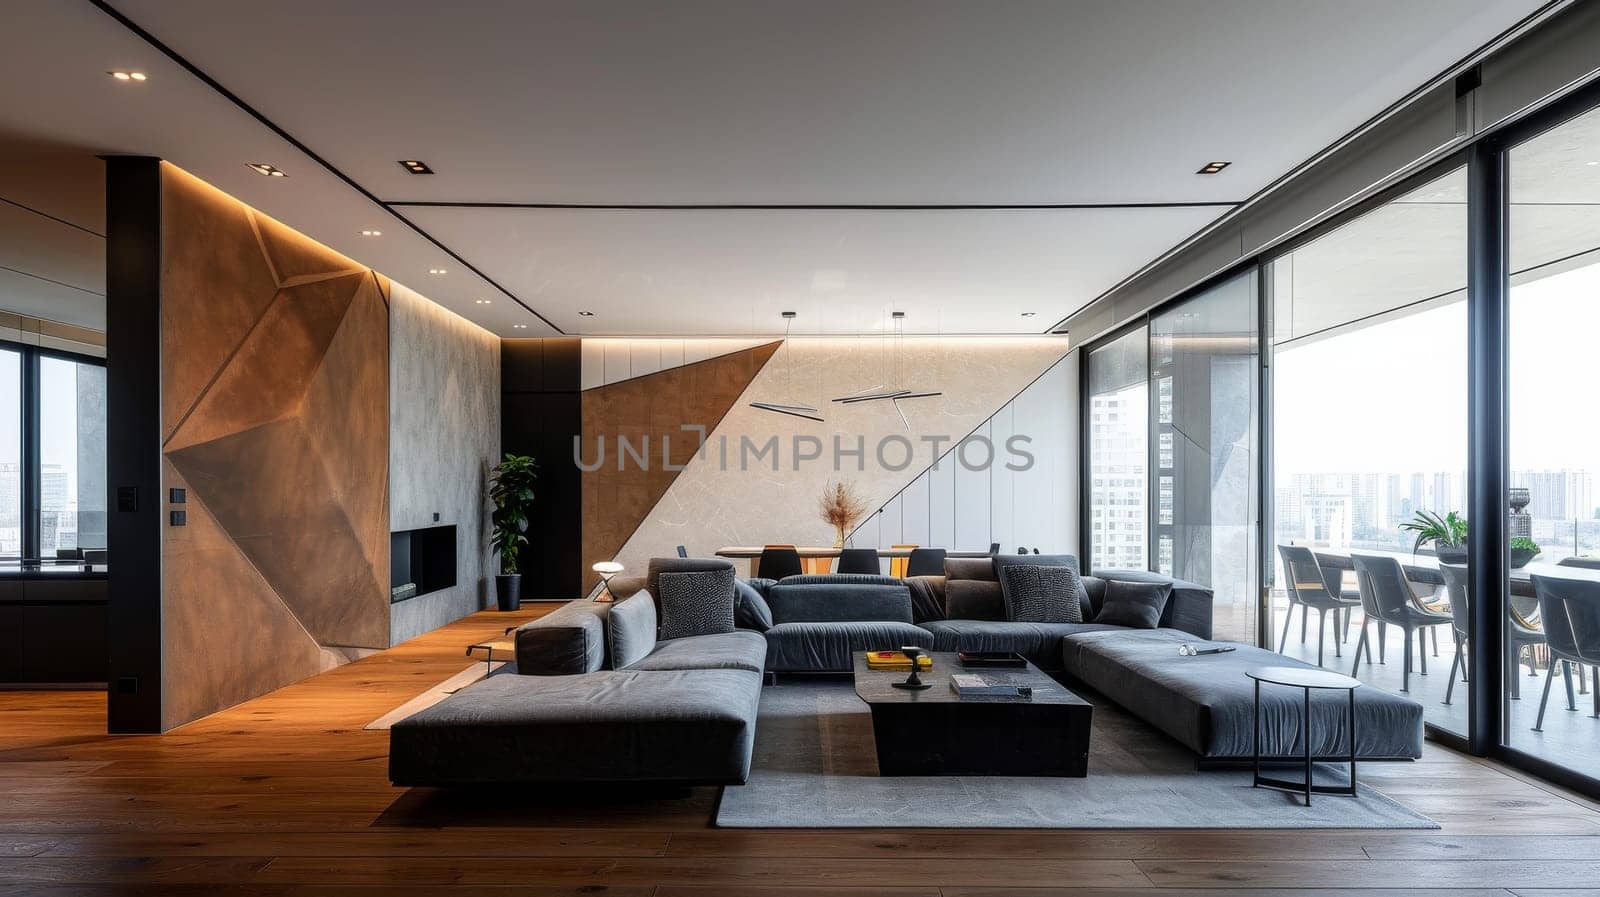 A large living room with a fireplace and a large sectional couch. The room is decorated in a modern style with a mix of wood and metal accents. The mood of the room is cozy and inviting